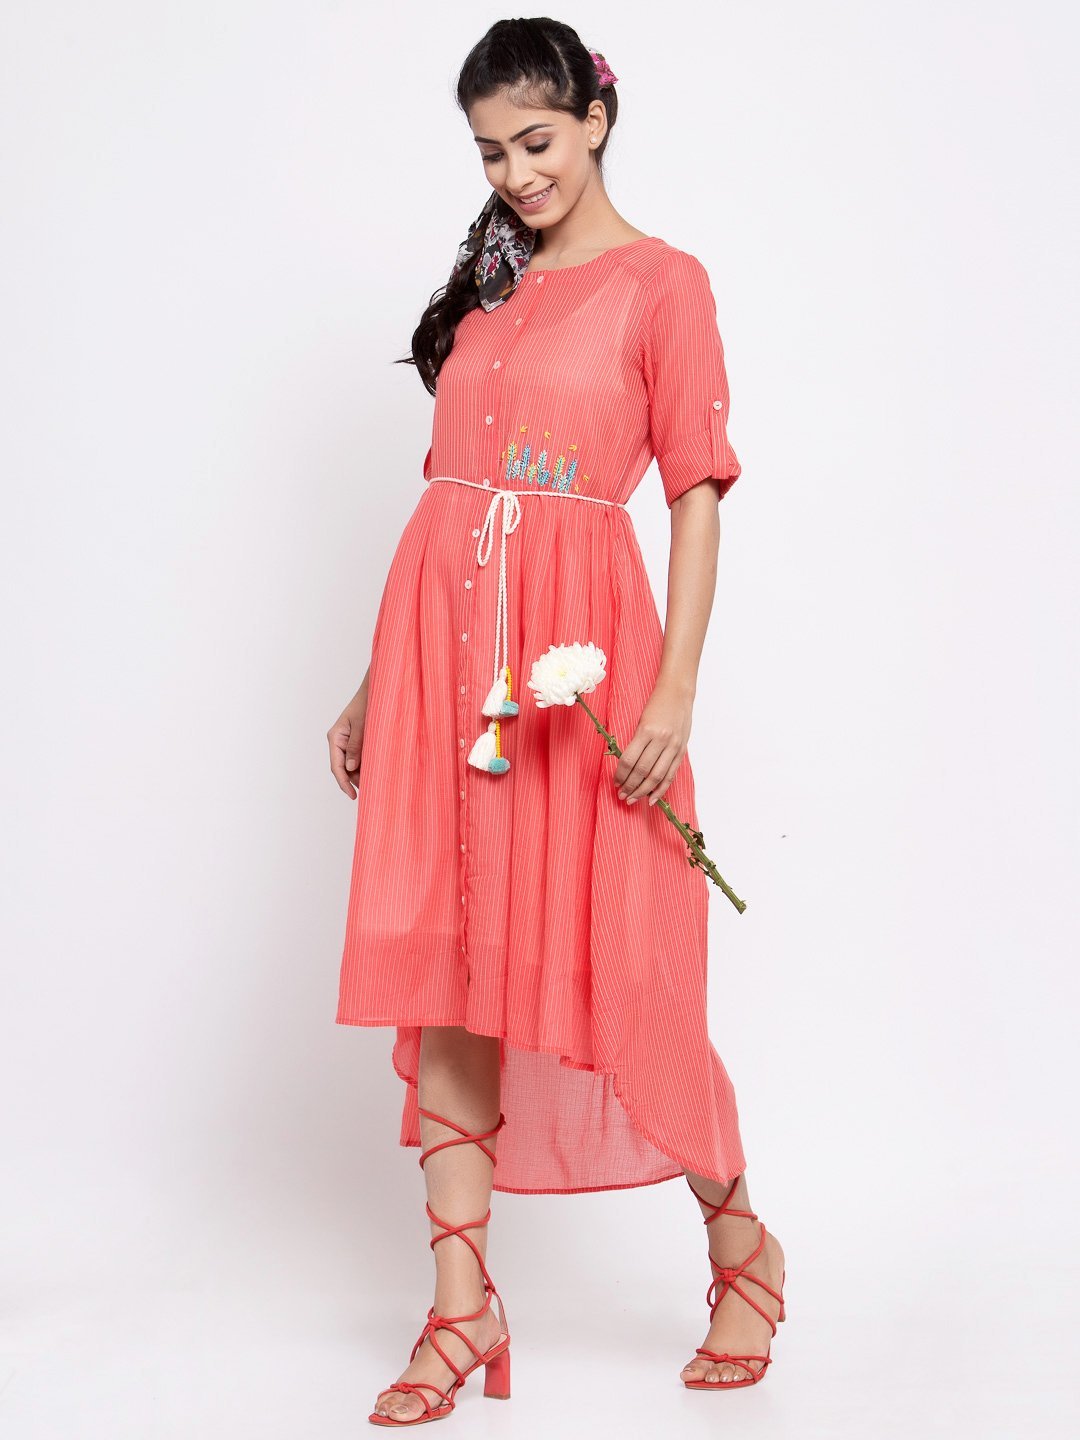 Terquois Dreamy Embroided Dress With Braided Belt Dresses TERQUOIS   